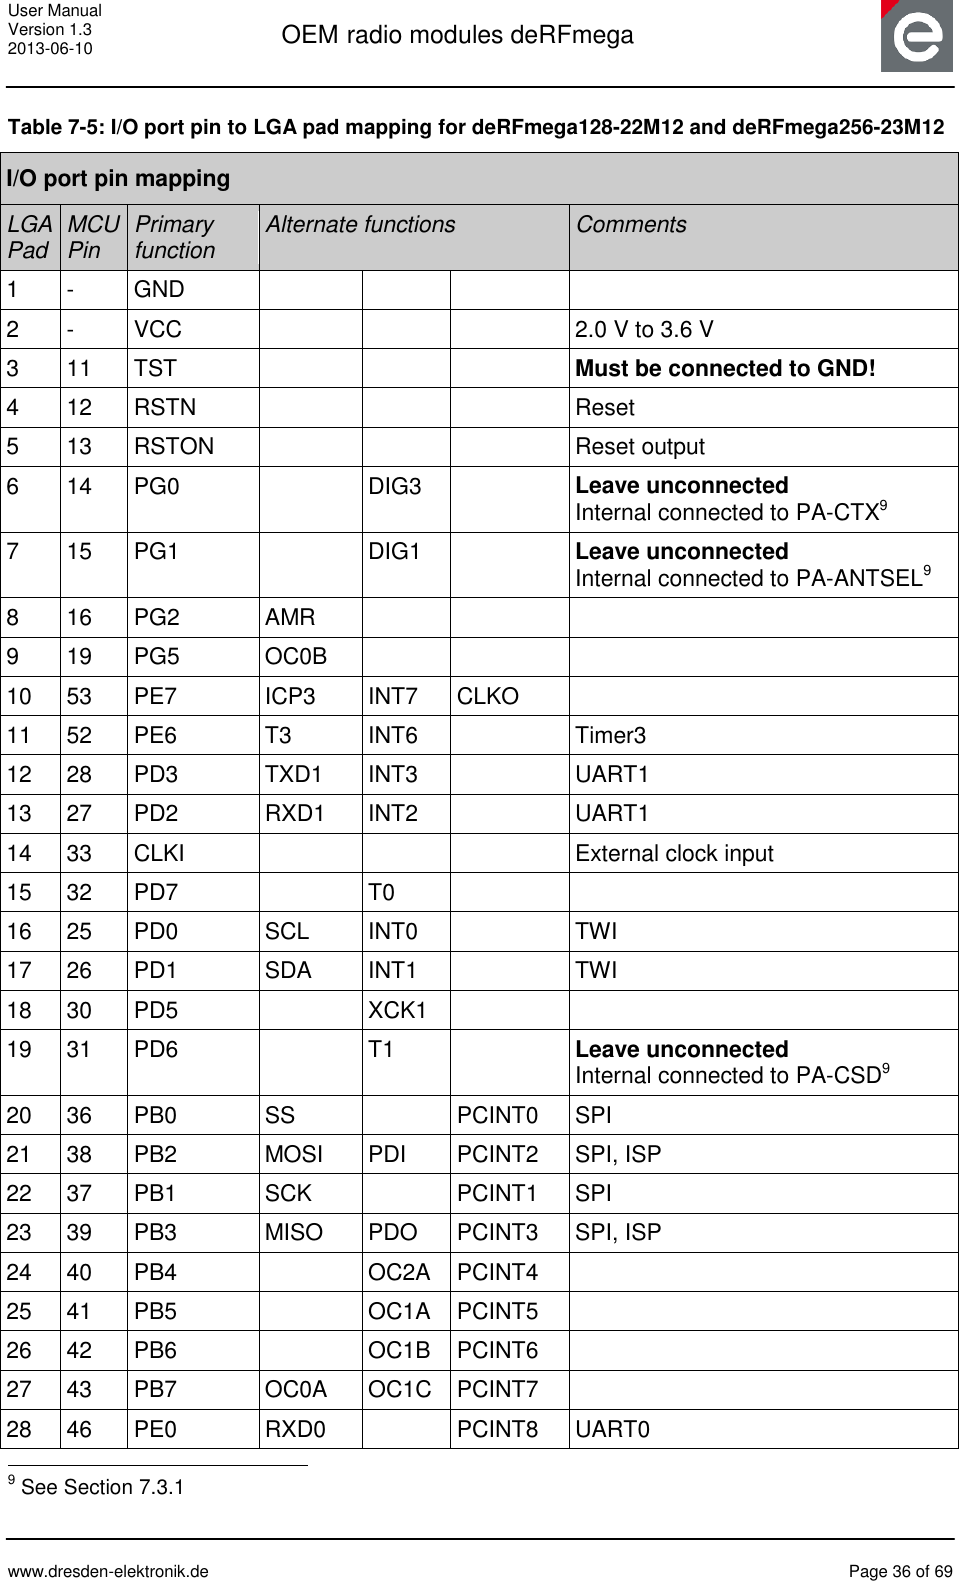 User Manual Version 1.3 2013-06-10  OEM radio modules deRFmega      www.dresden-elektronik.de  Page 36 of 69  Table 7-5: I/O port pin to LGA pad mapping for deRFmega128-22M12 and deRFmega256-23M12 I/O port pin mapping LGA Pad MCU Pin Primary function Alternate functions  Comments 1 - GND     2 - VCC    2.0 V to 3.6 V 3 11 TST    Must be connected to GND! 4 12 RSTN    Reset 5 13 RSTON    Reset output 6 14 PG0  DIG3  Leave unconnected Internal connected to PA-CTX9 7 15 PG1  DIG1  Leave unconnected Internal connected to PA-ANTSEL9 8 16 PG2 AMR    9 19 PG5 OC0B    10 53 PE7 ICP3 INT7 CLKO  11 52 PE6 T3 INT6  Timer3 12 28 PD3 TXD1 INT3  UART1 13 27 PD2 RXD1 INT2  UART1 14 33 CLKI    External clock input 15 32 PD7  T0   16 25 PD0 SCL INT0  TWI 17 26 PD1 SDA INT1  TWI 18 30 PD5  XCK1   19 31 PD6  T1  Leave unconnected Internal connected to PA-CSD9 20 36 PB0 SS  PCINT0 SPI 21 38 PB2 MOSI PDI PCINT2 SPI, ISP 22 37 PB1 SCK  PCINT1 SPI 23 39 PB3 MISO PDO PCINT3 SPI, ISP 24 40 PB4  OC2A PCINT4  25 41 PB5  OC1A PCINT5  26 42 PB6   OC1B PCINT6  27 43 PB7 OC0A OC1C PCINT7  28 46 PE0 RXD0  PCINT8 UART0                                                 9 See Section 7.3.1 